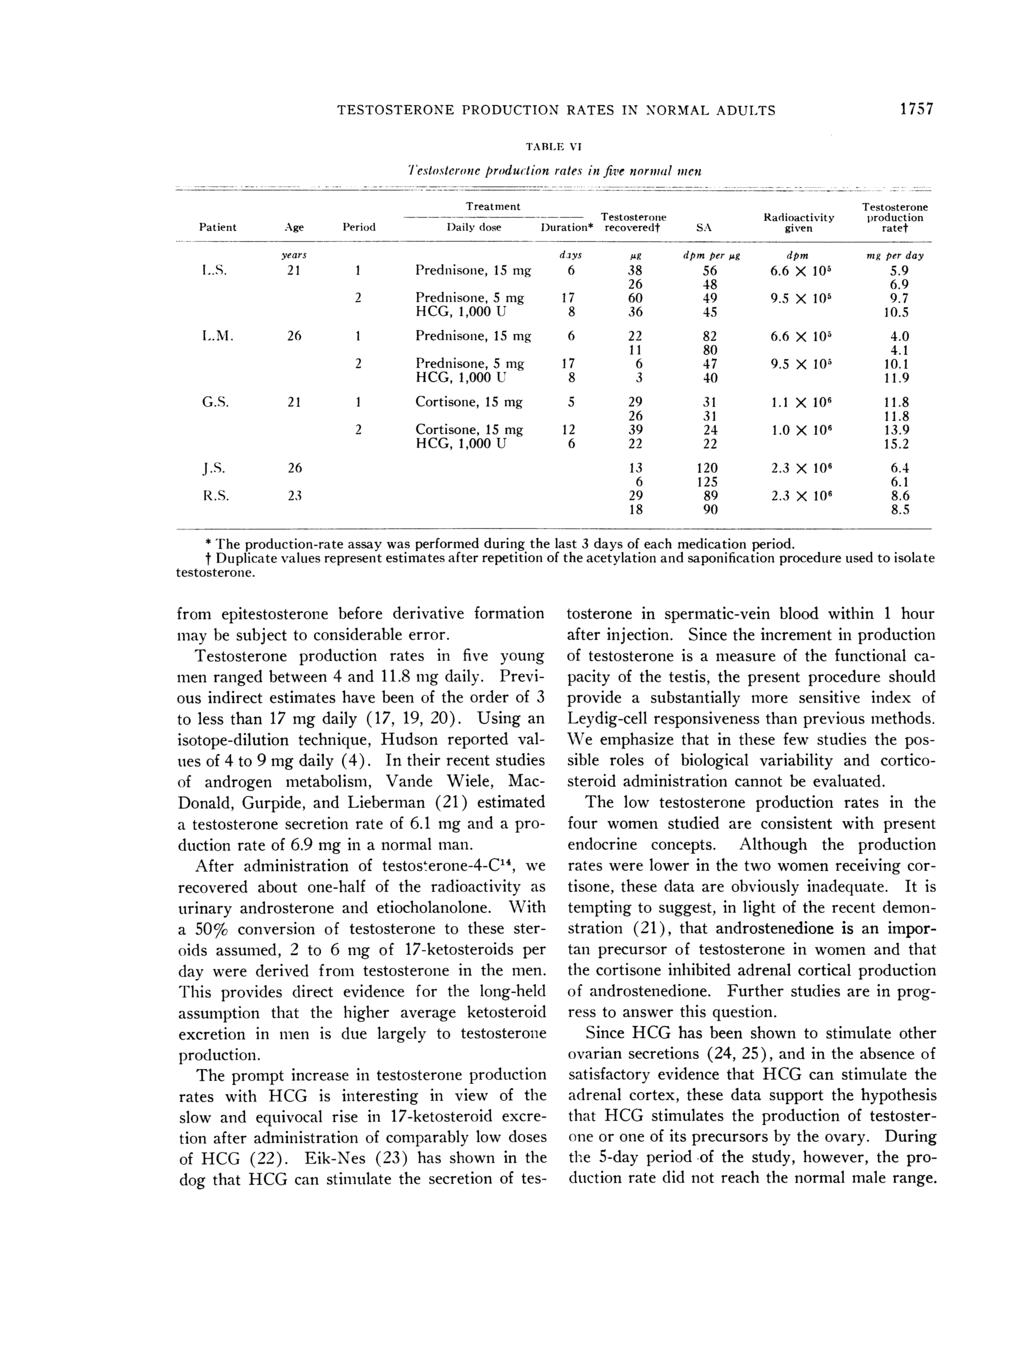 TESTOSTERONE PRODUCTION RATES IN NORMAL ADULTS 1757 TABLE VI lestostcrone production rates in five normal JI1CI Patient Age Period L.S. L.M. G.S. J.S. 26 R.S. Treatment Daily dose years 21 1